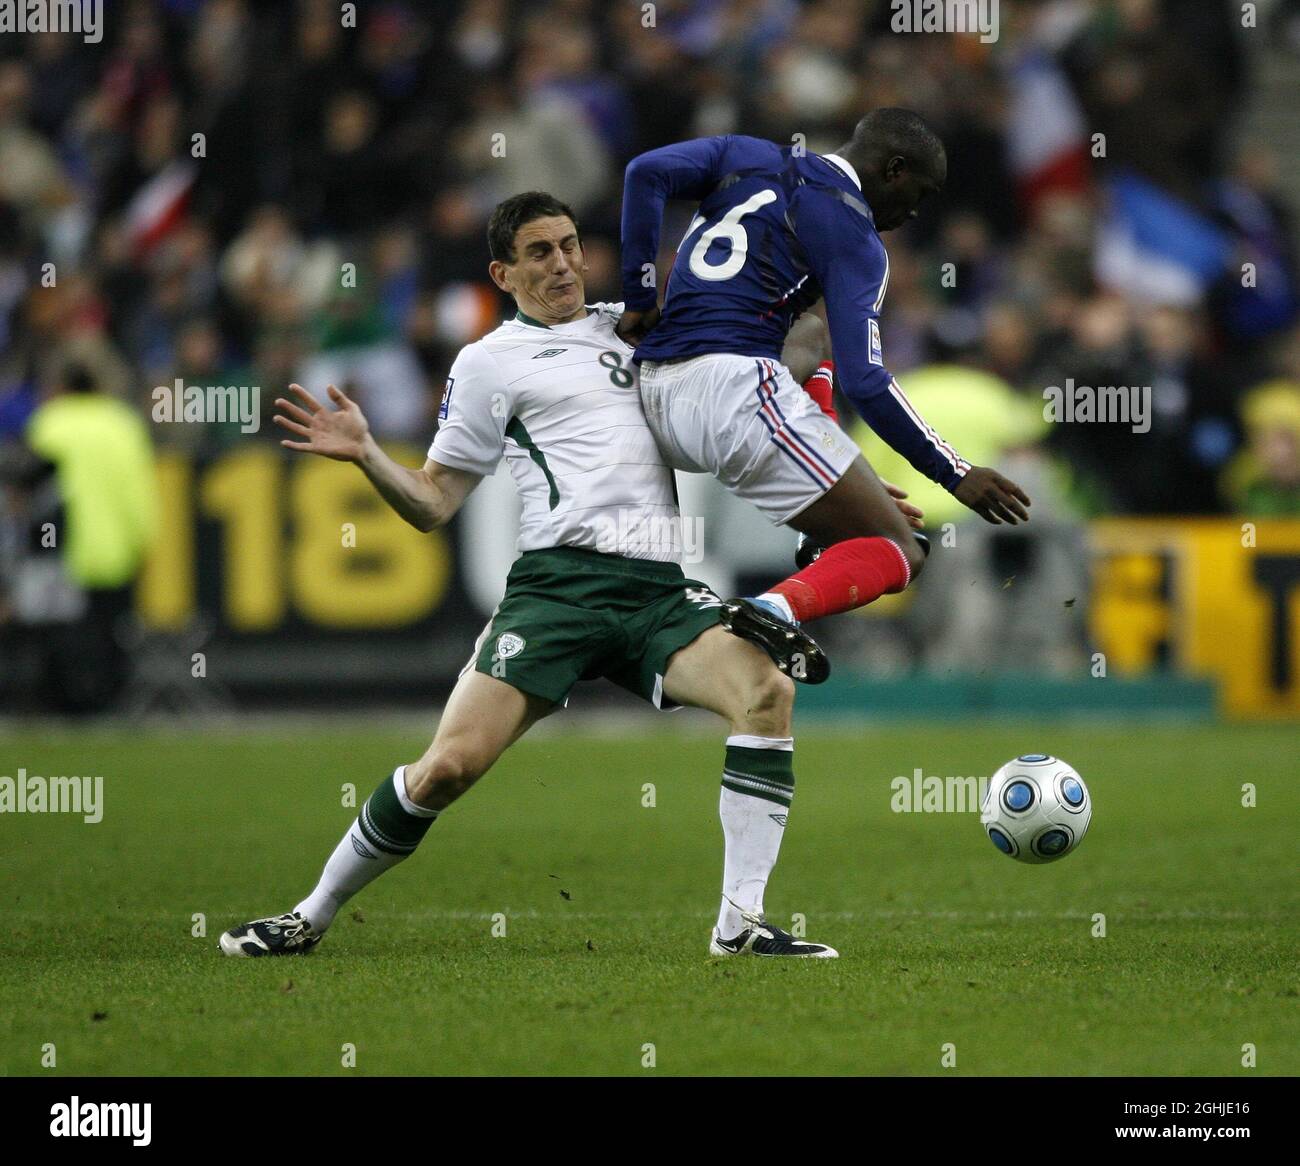 France's Lassana Diarra tussles with Republic of Ireland's Keith Andrews during FIFA 2010 World Cup Qualifying match between France and Republic of Ireland, at Stade de France in Saint-Denis near Paris, France. Stock Photo